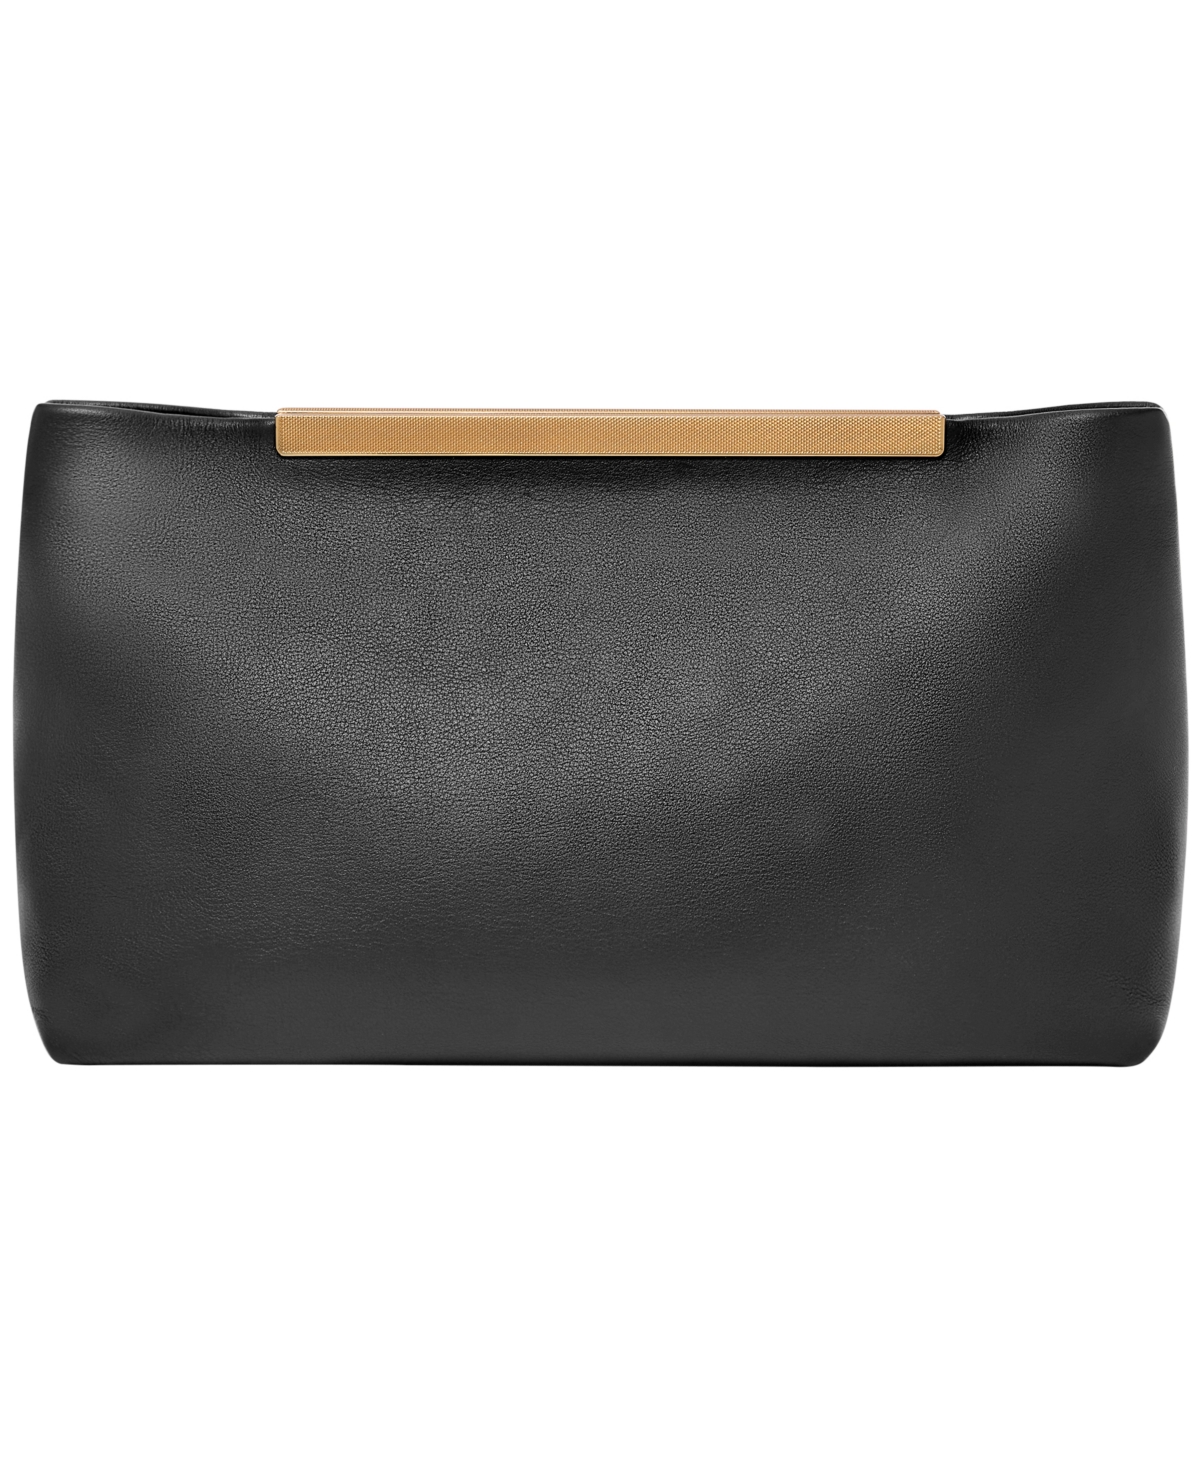 Penrose Large Pouch Clutch - Black